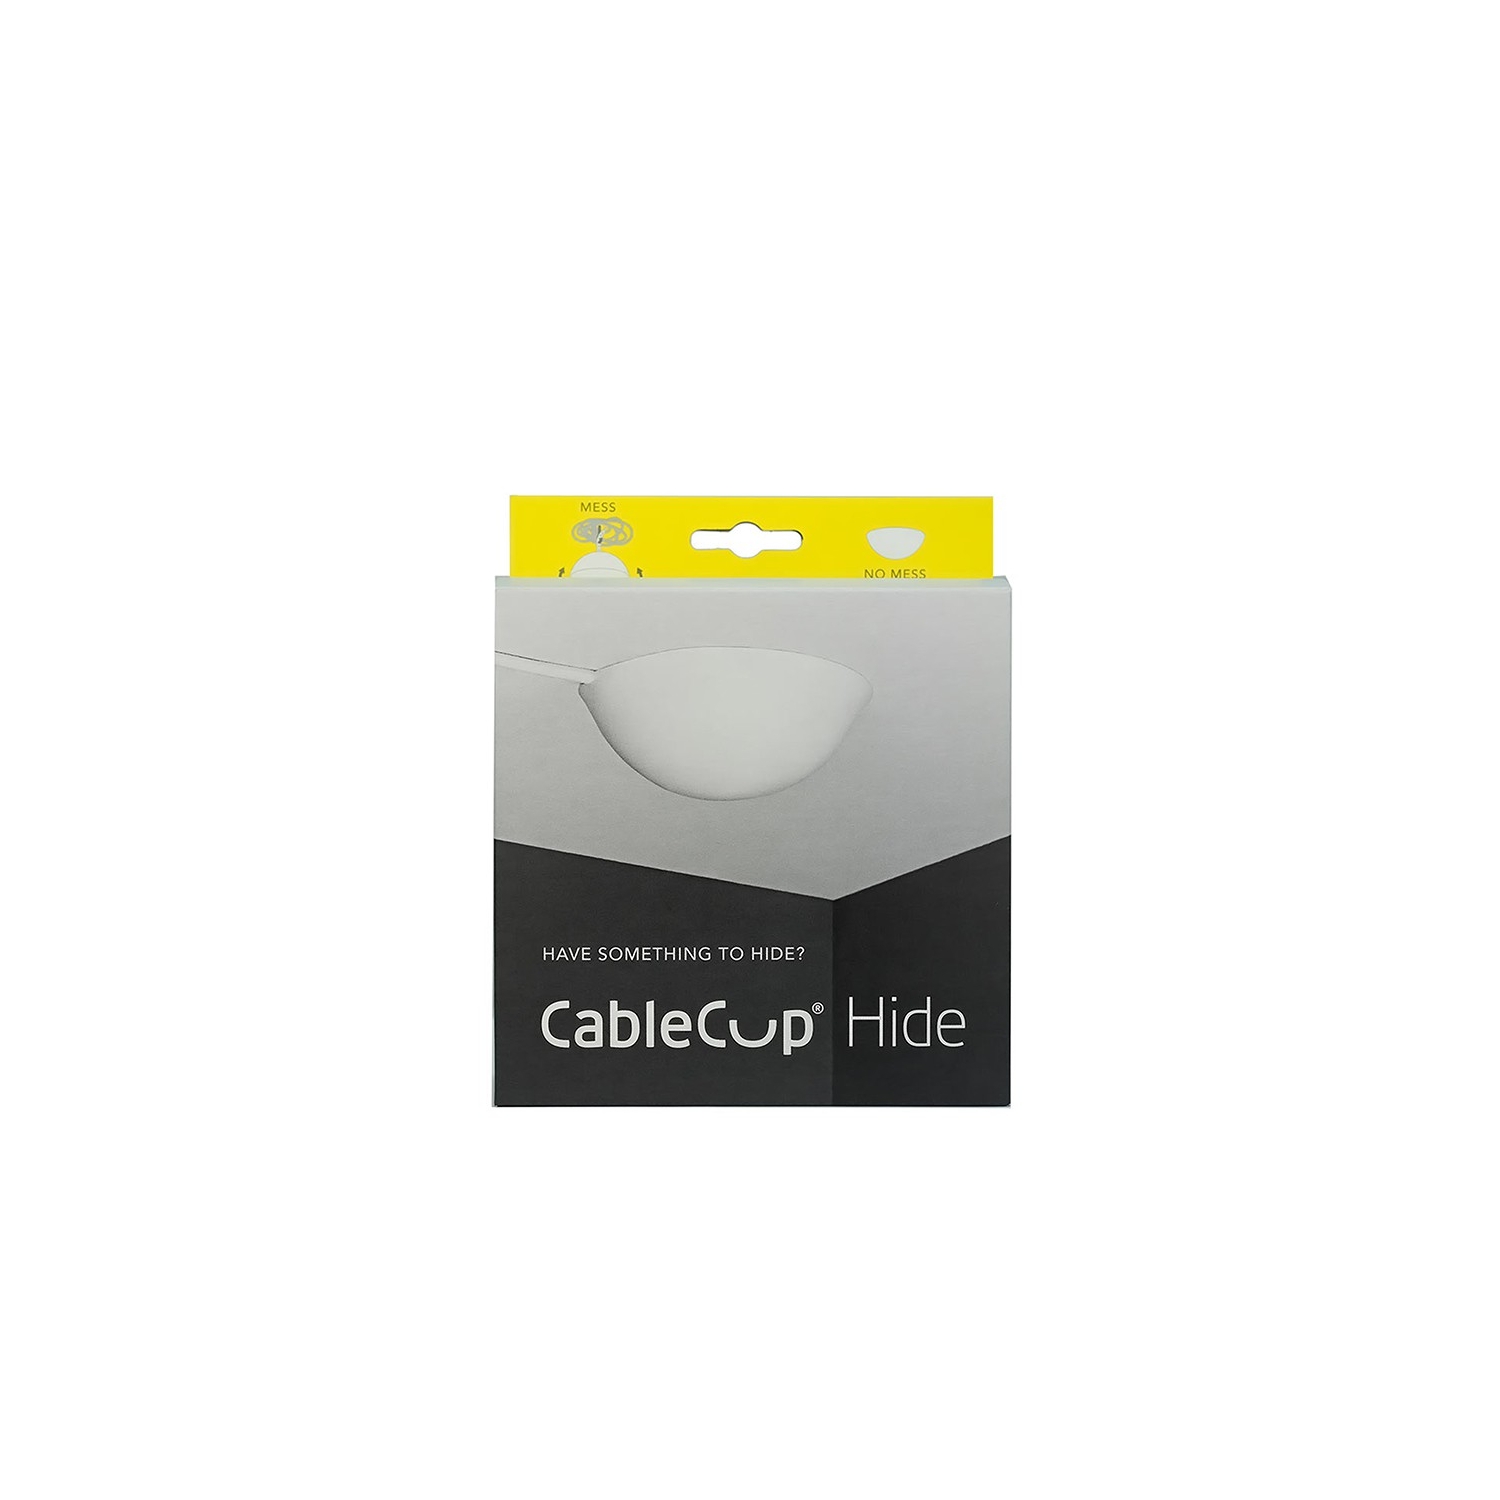 Cable Cup® Hide silicone ceiling rose kit